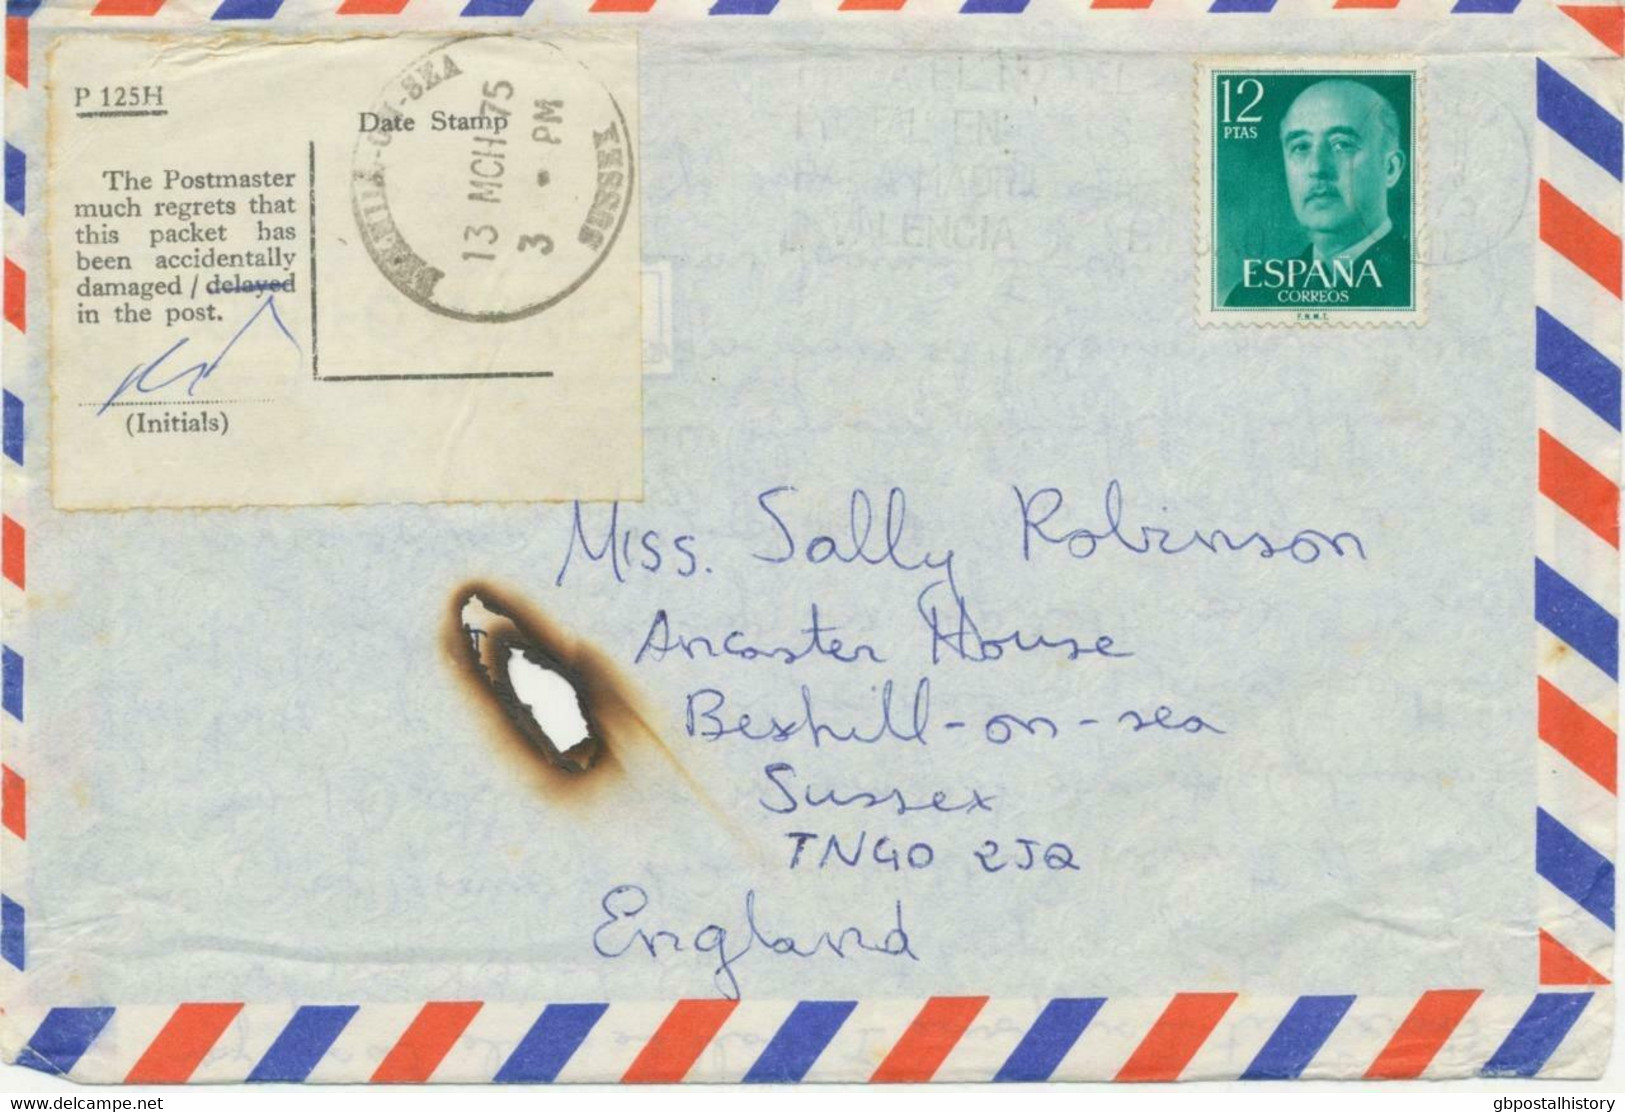 GB 1975 DISASTER MAIL Flight Cover From SPAIN W. Skeleton BEXHILL-ON-SEA SUSSEX - Errors, Freaks & Oddities (EFOs